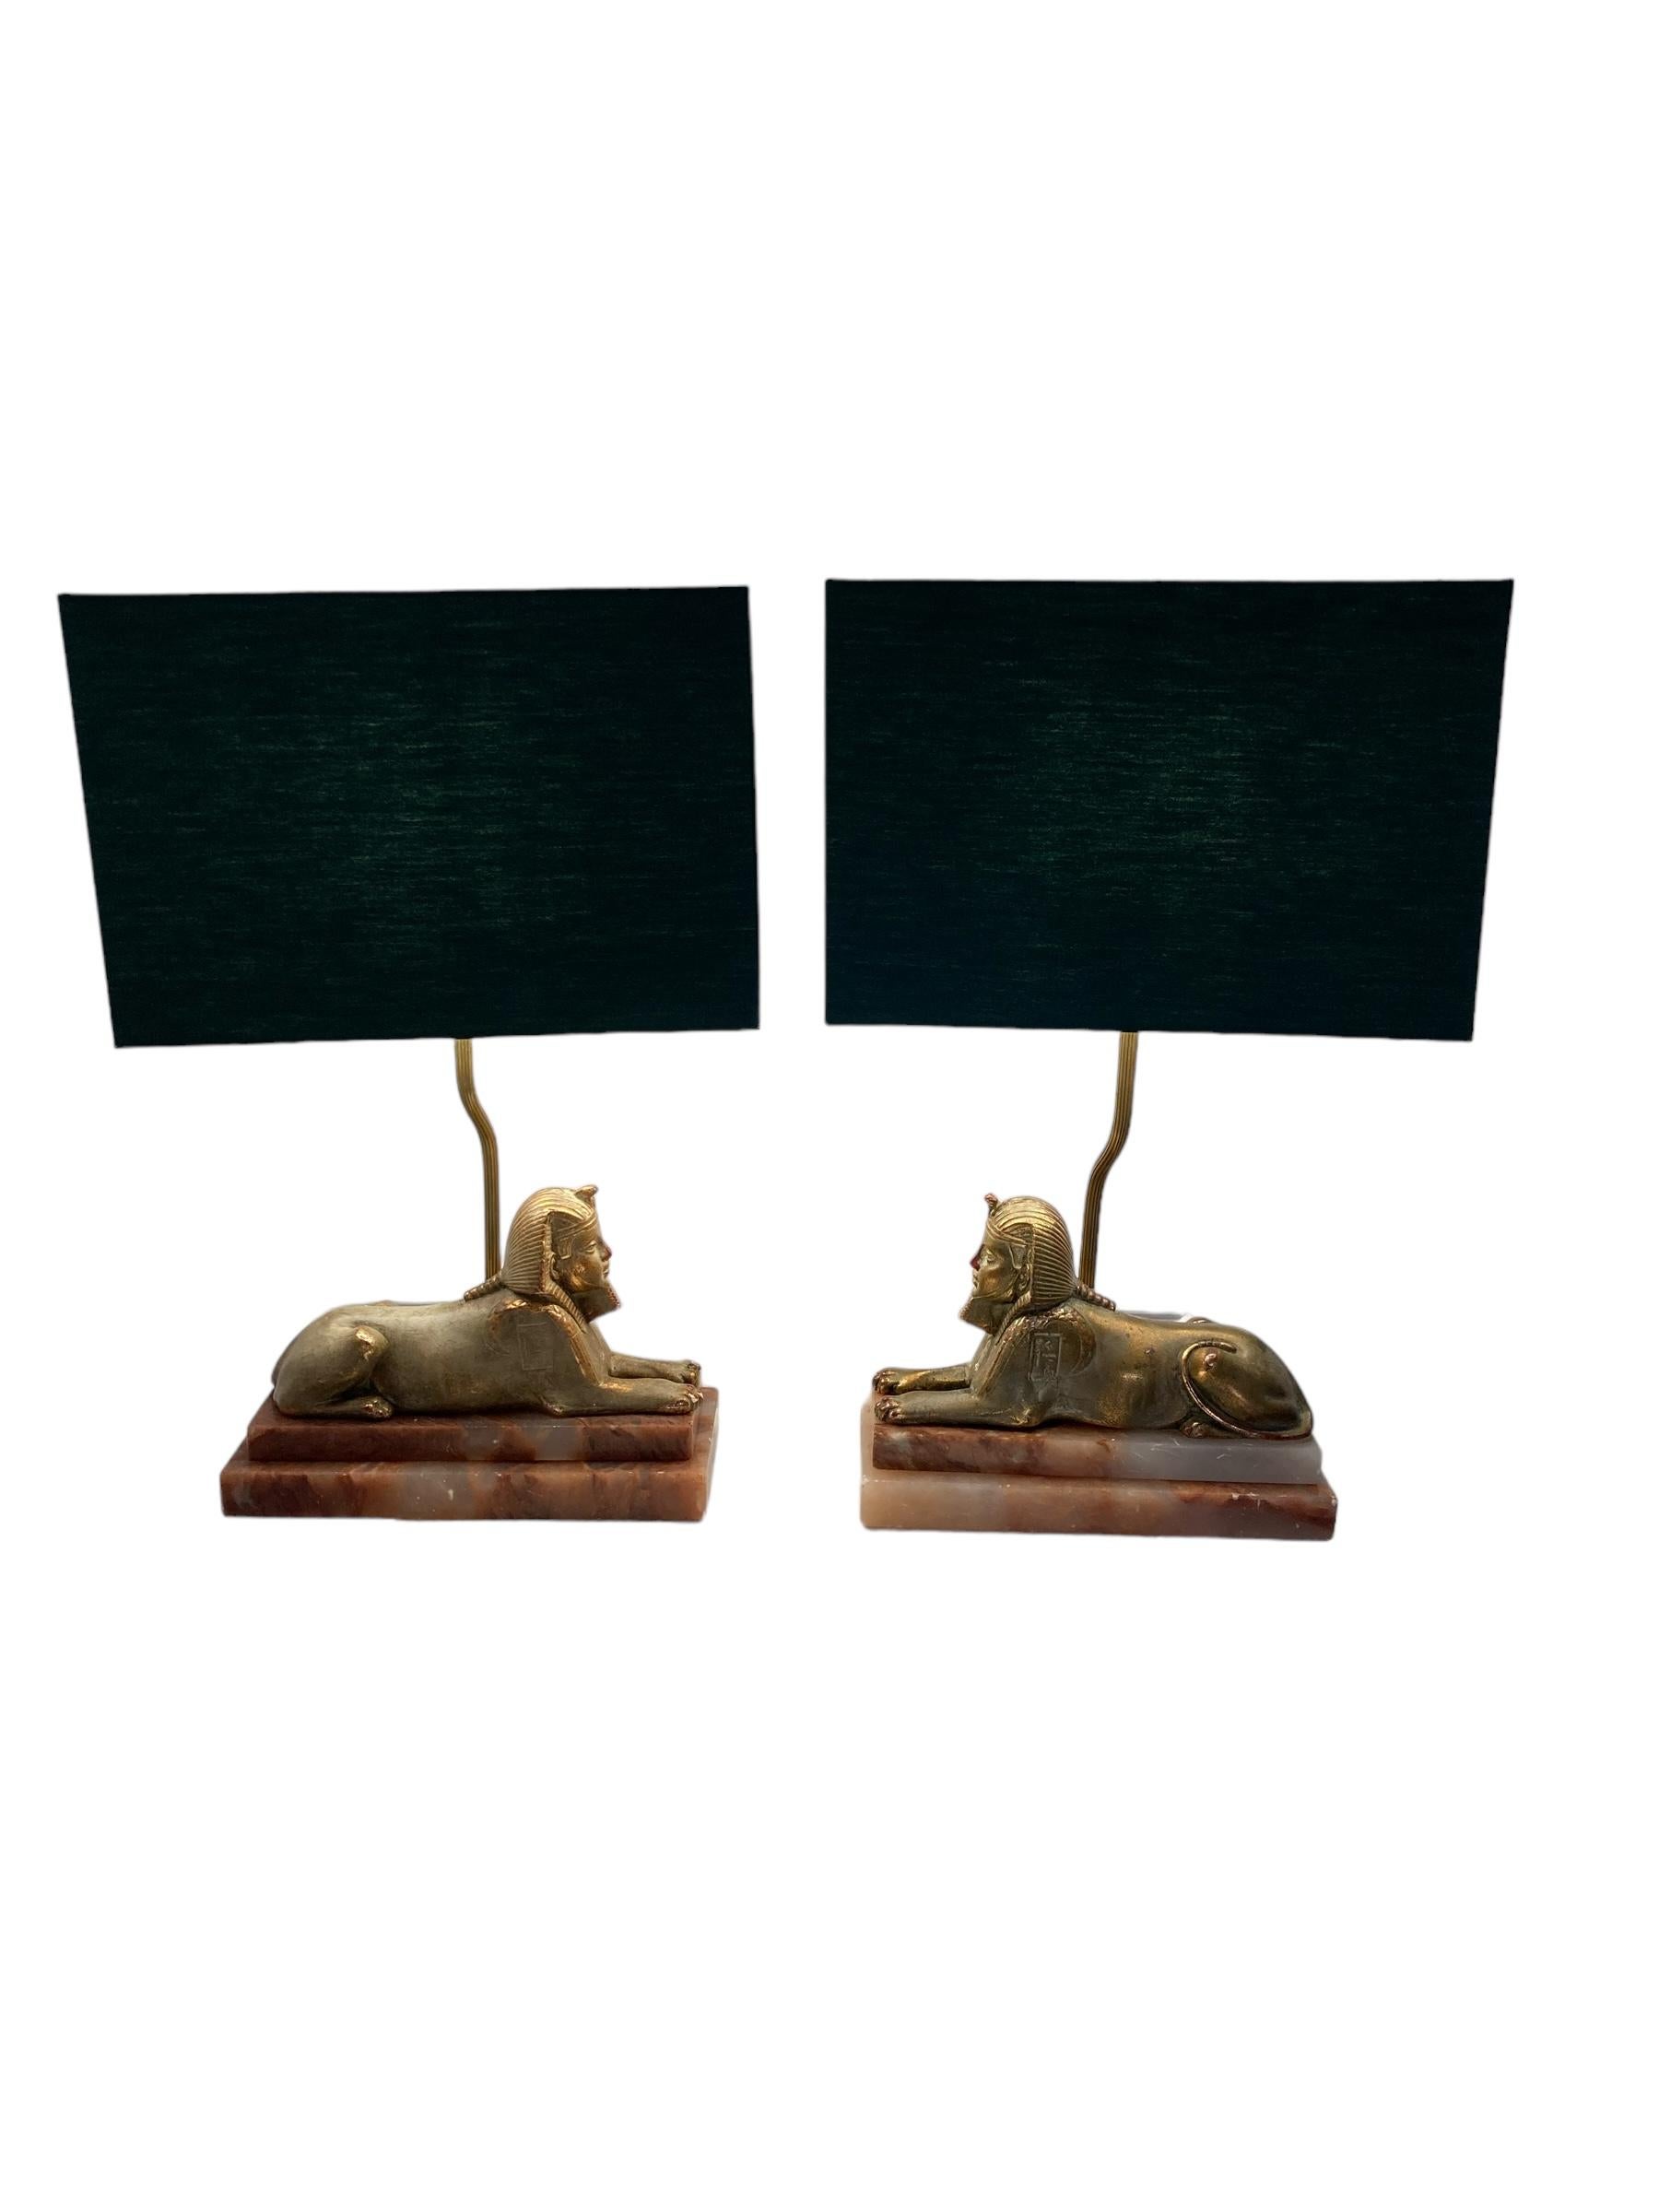 Pair of Art Deco Egytian Sphinx style Table Lamps on a Marble Base Dark Green Shades. <span>Crafted with meticulous attention to detail, this lamp effortlessly combines elegance and strength. beautifully sculpted, add a touch of regal charm to any